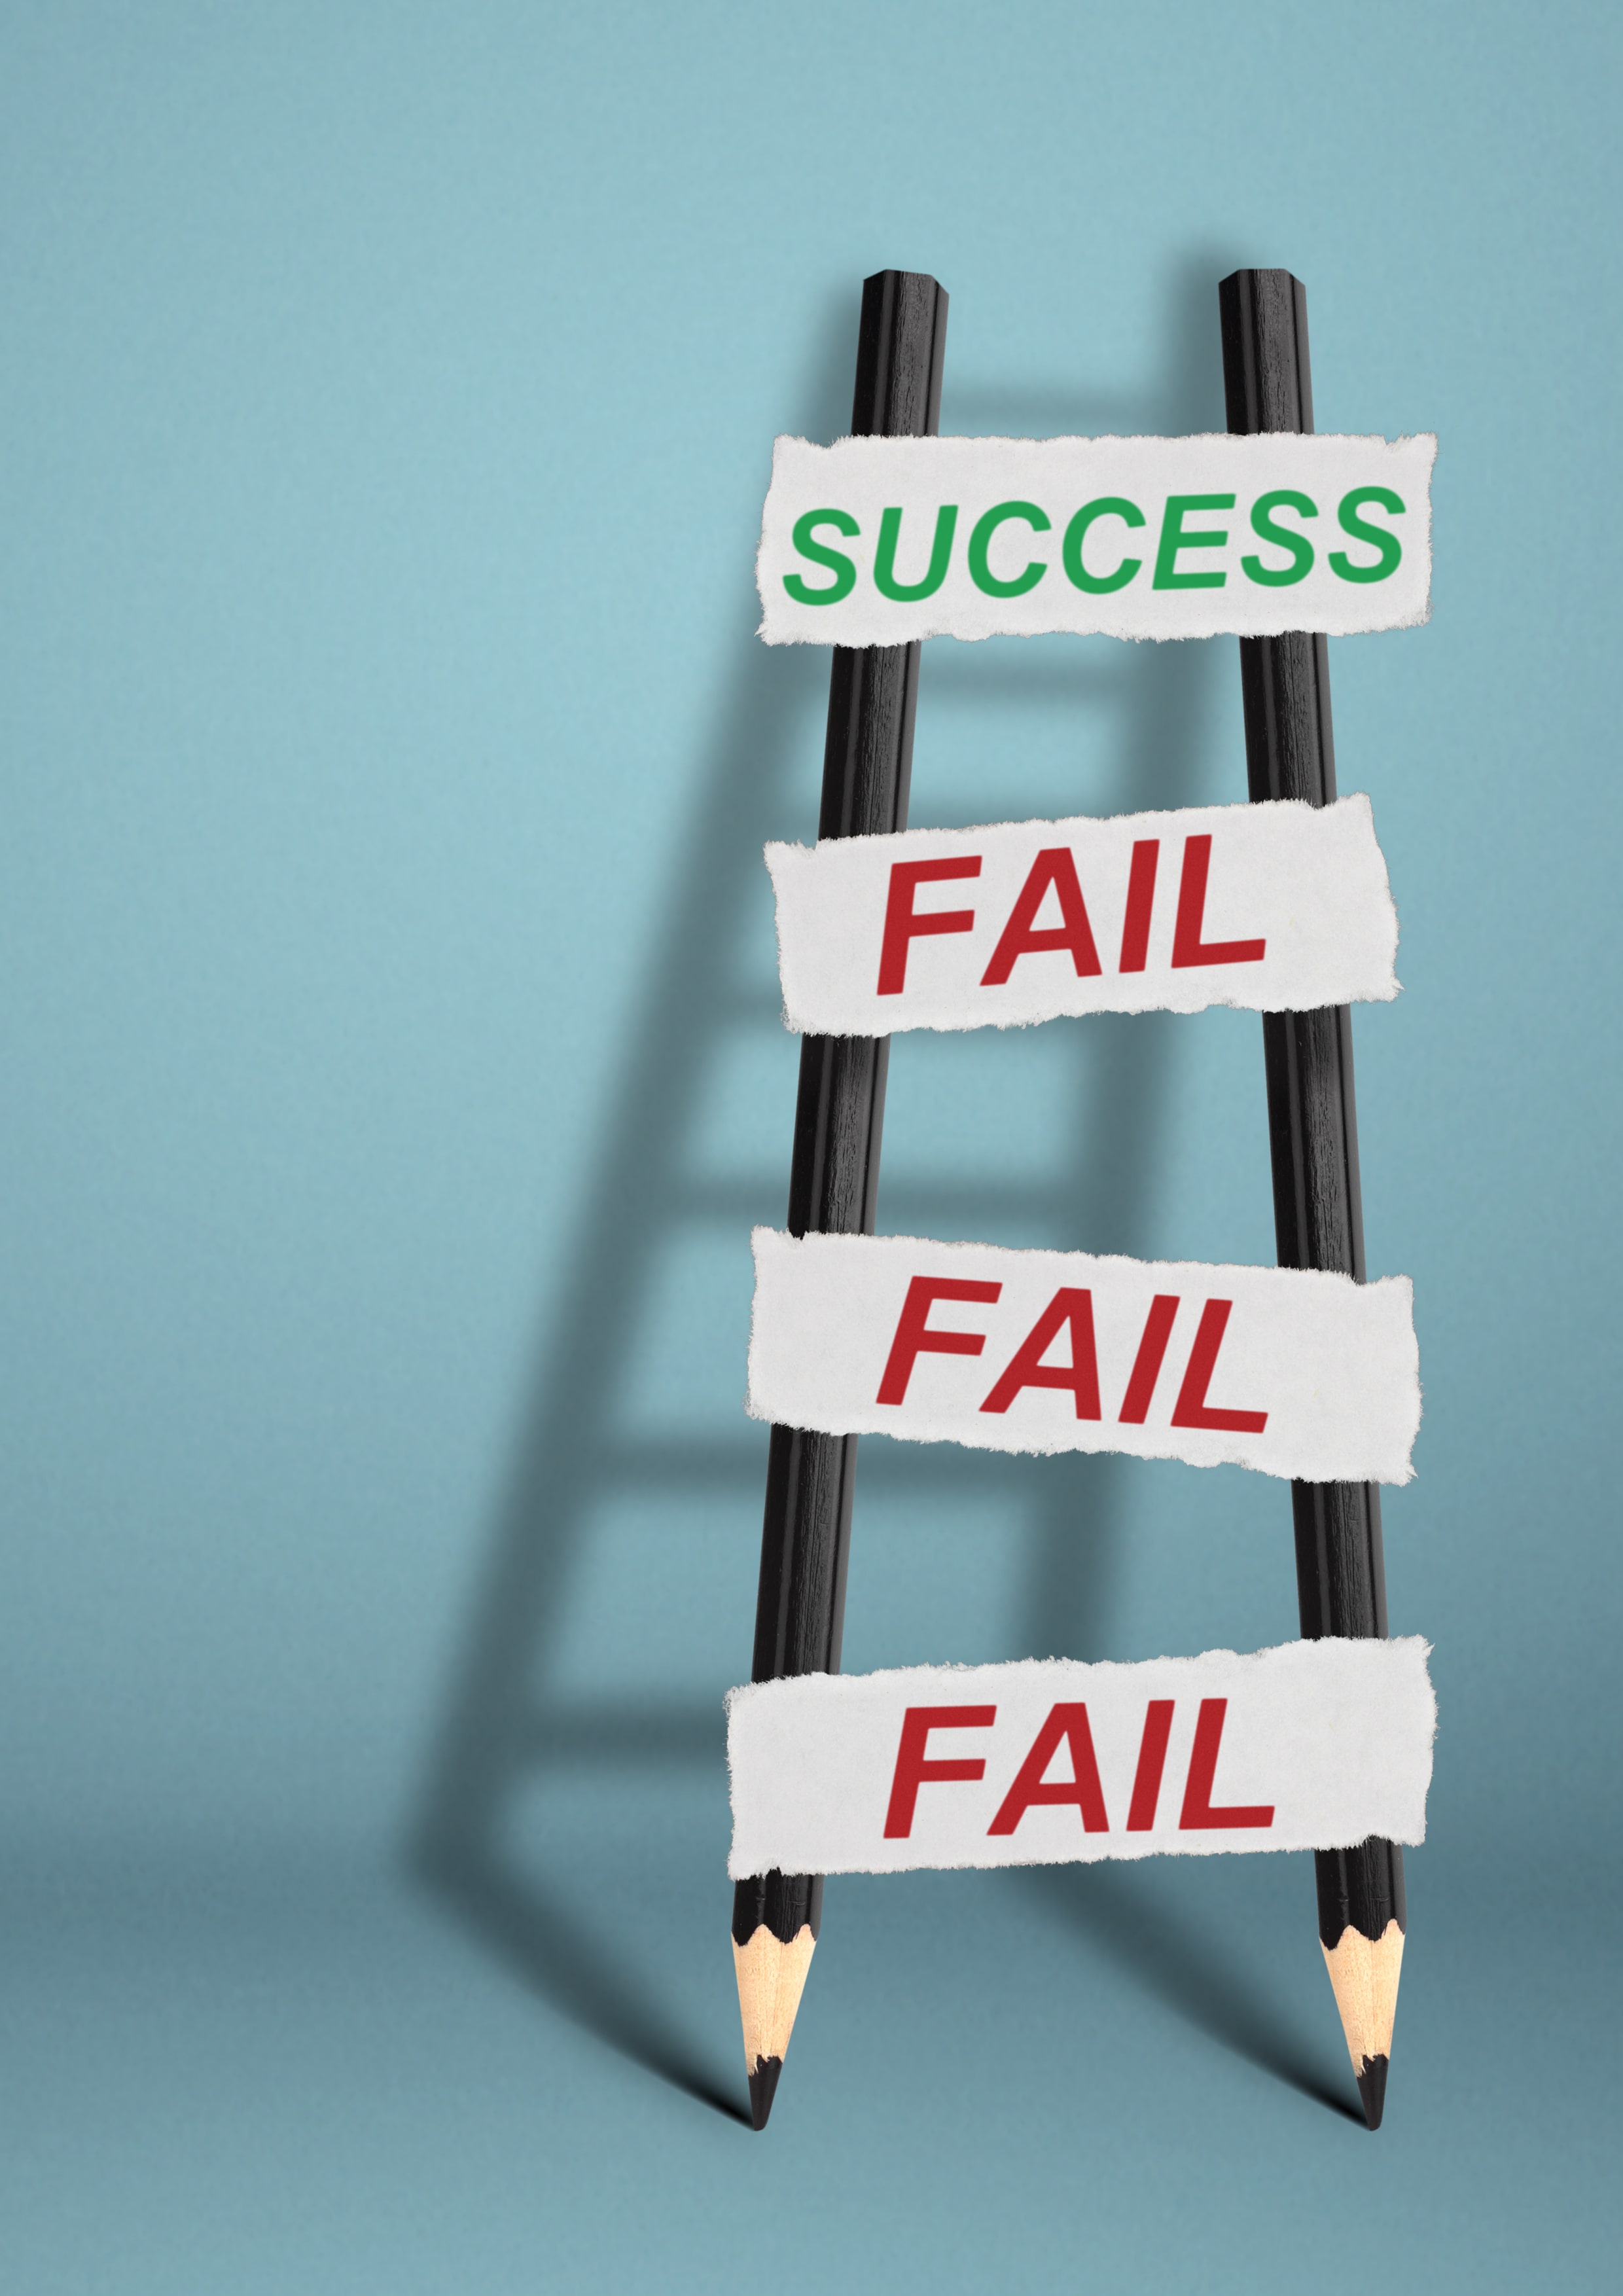 failure leads to success concept on ladder, bounce back from failures